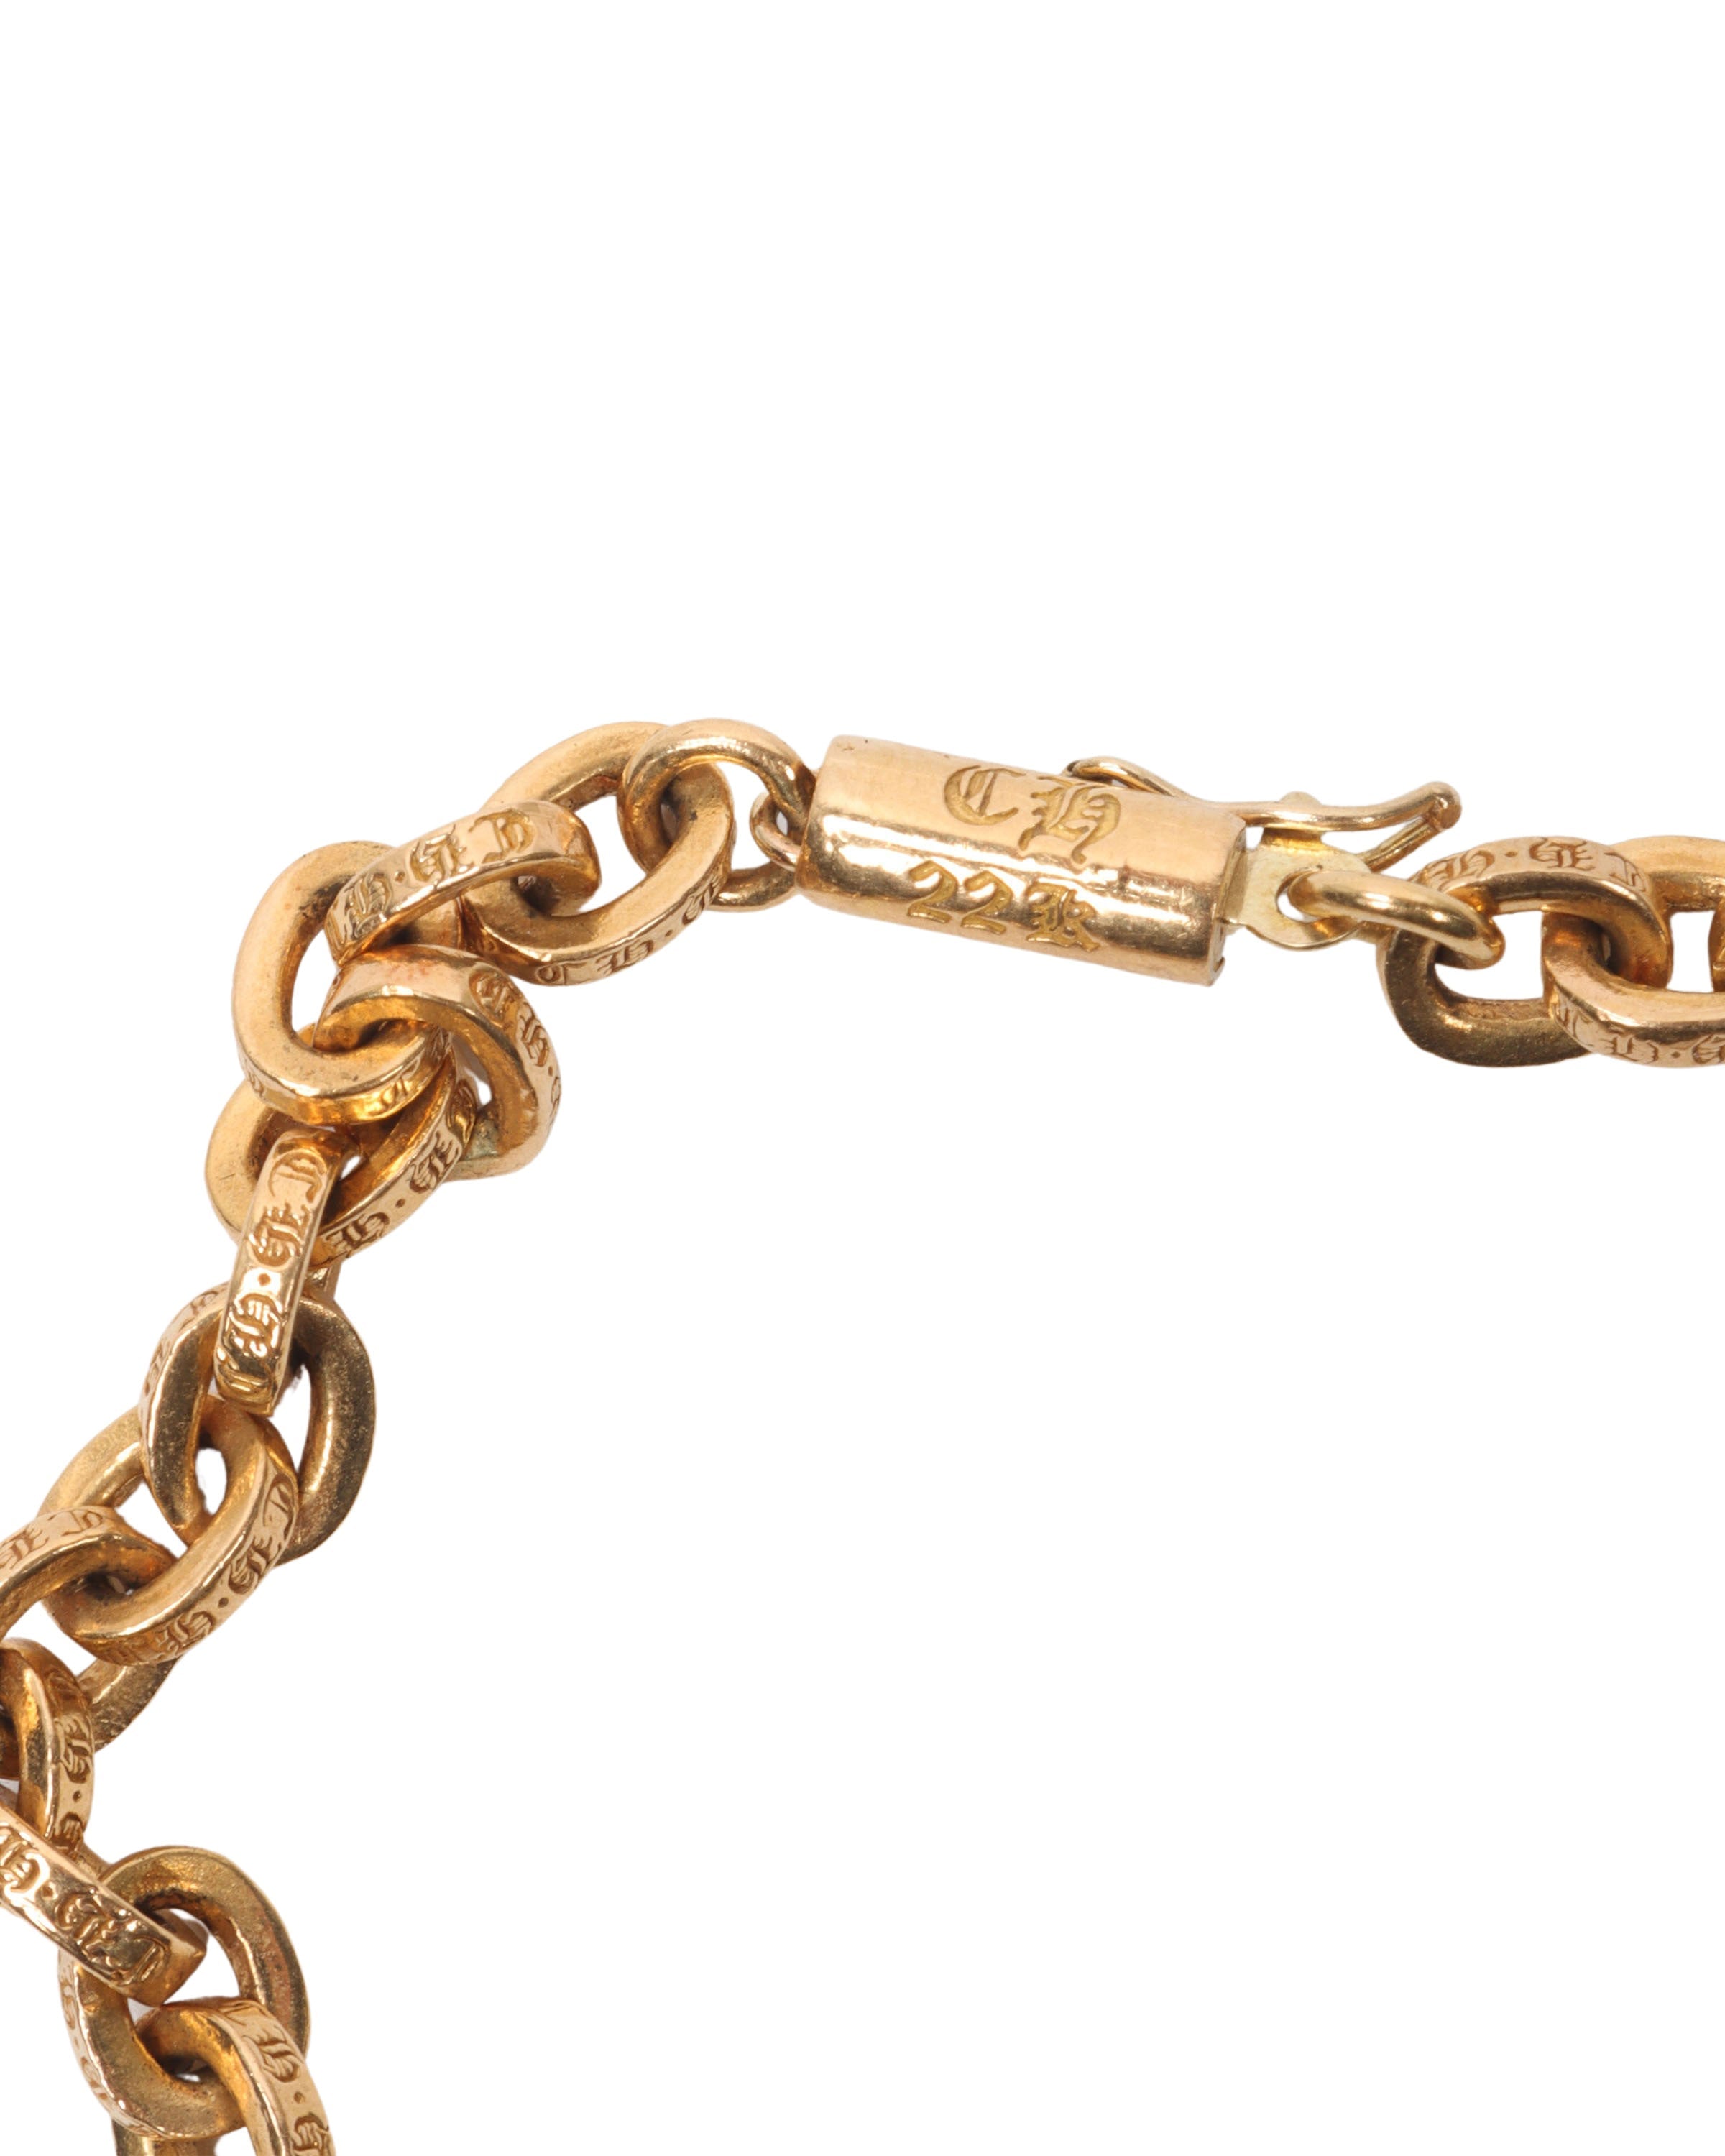 22k Gold Paper Chain Bracelet with Star Pendant